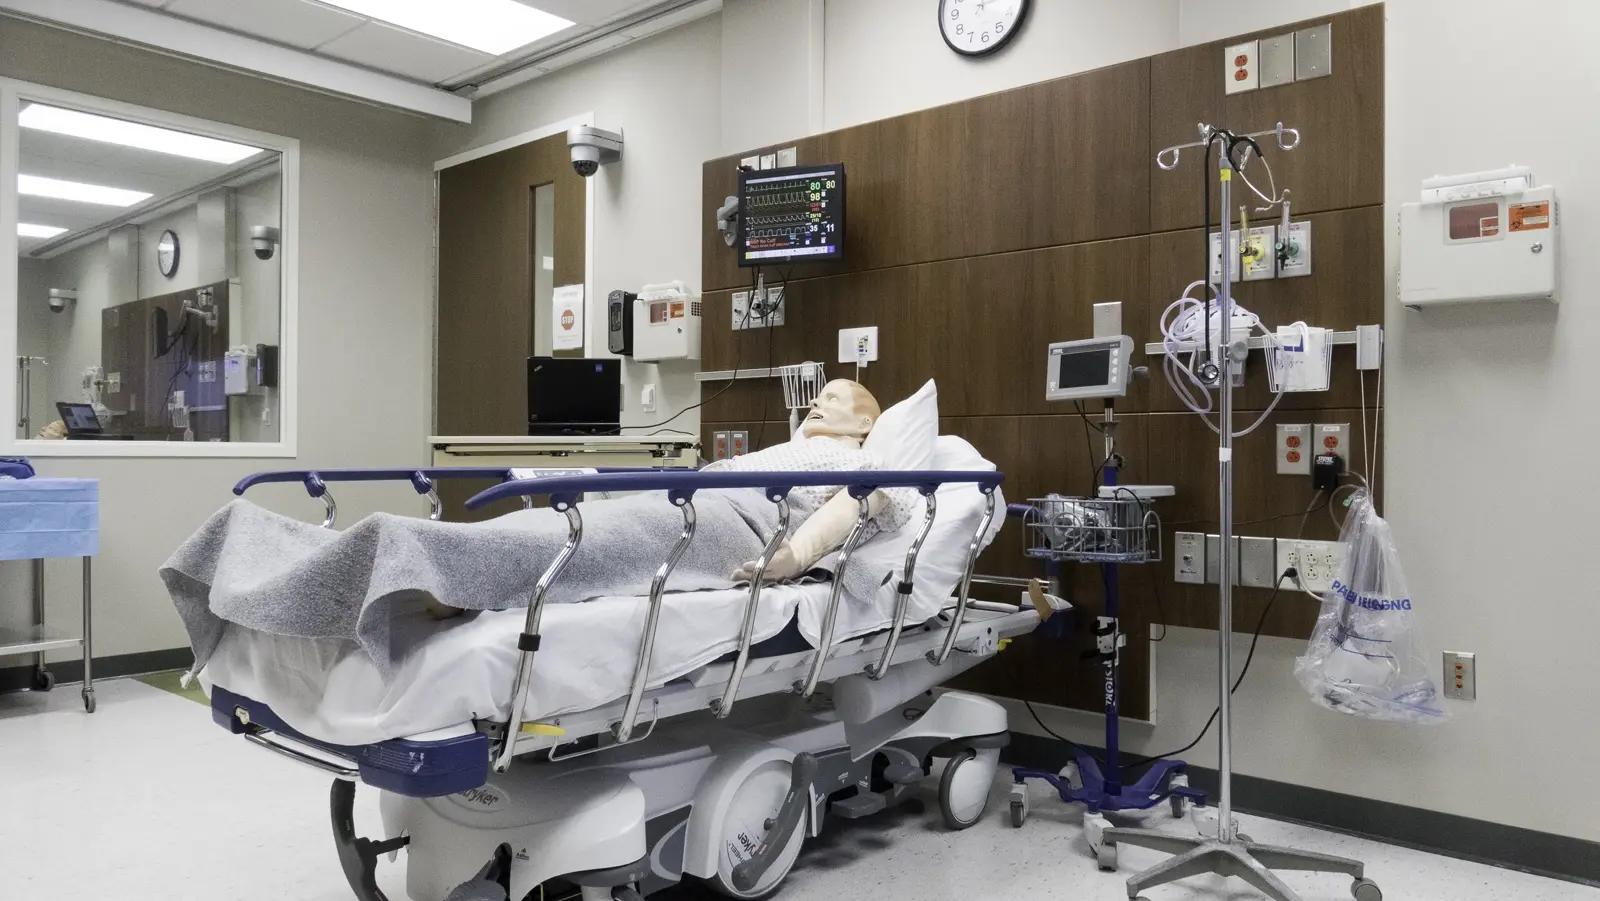 CAMLS A hospital room with a medical mannequin lying on a bed, covered with a gray blanket. The room features monitors, medical equipment, and an IV stand. The walls are equipped with various medical devices and a clock. The atmosphere is clinical and organized.